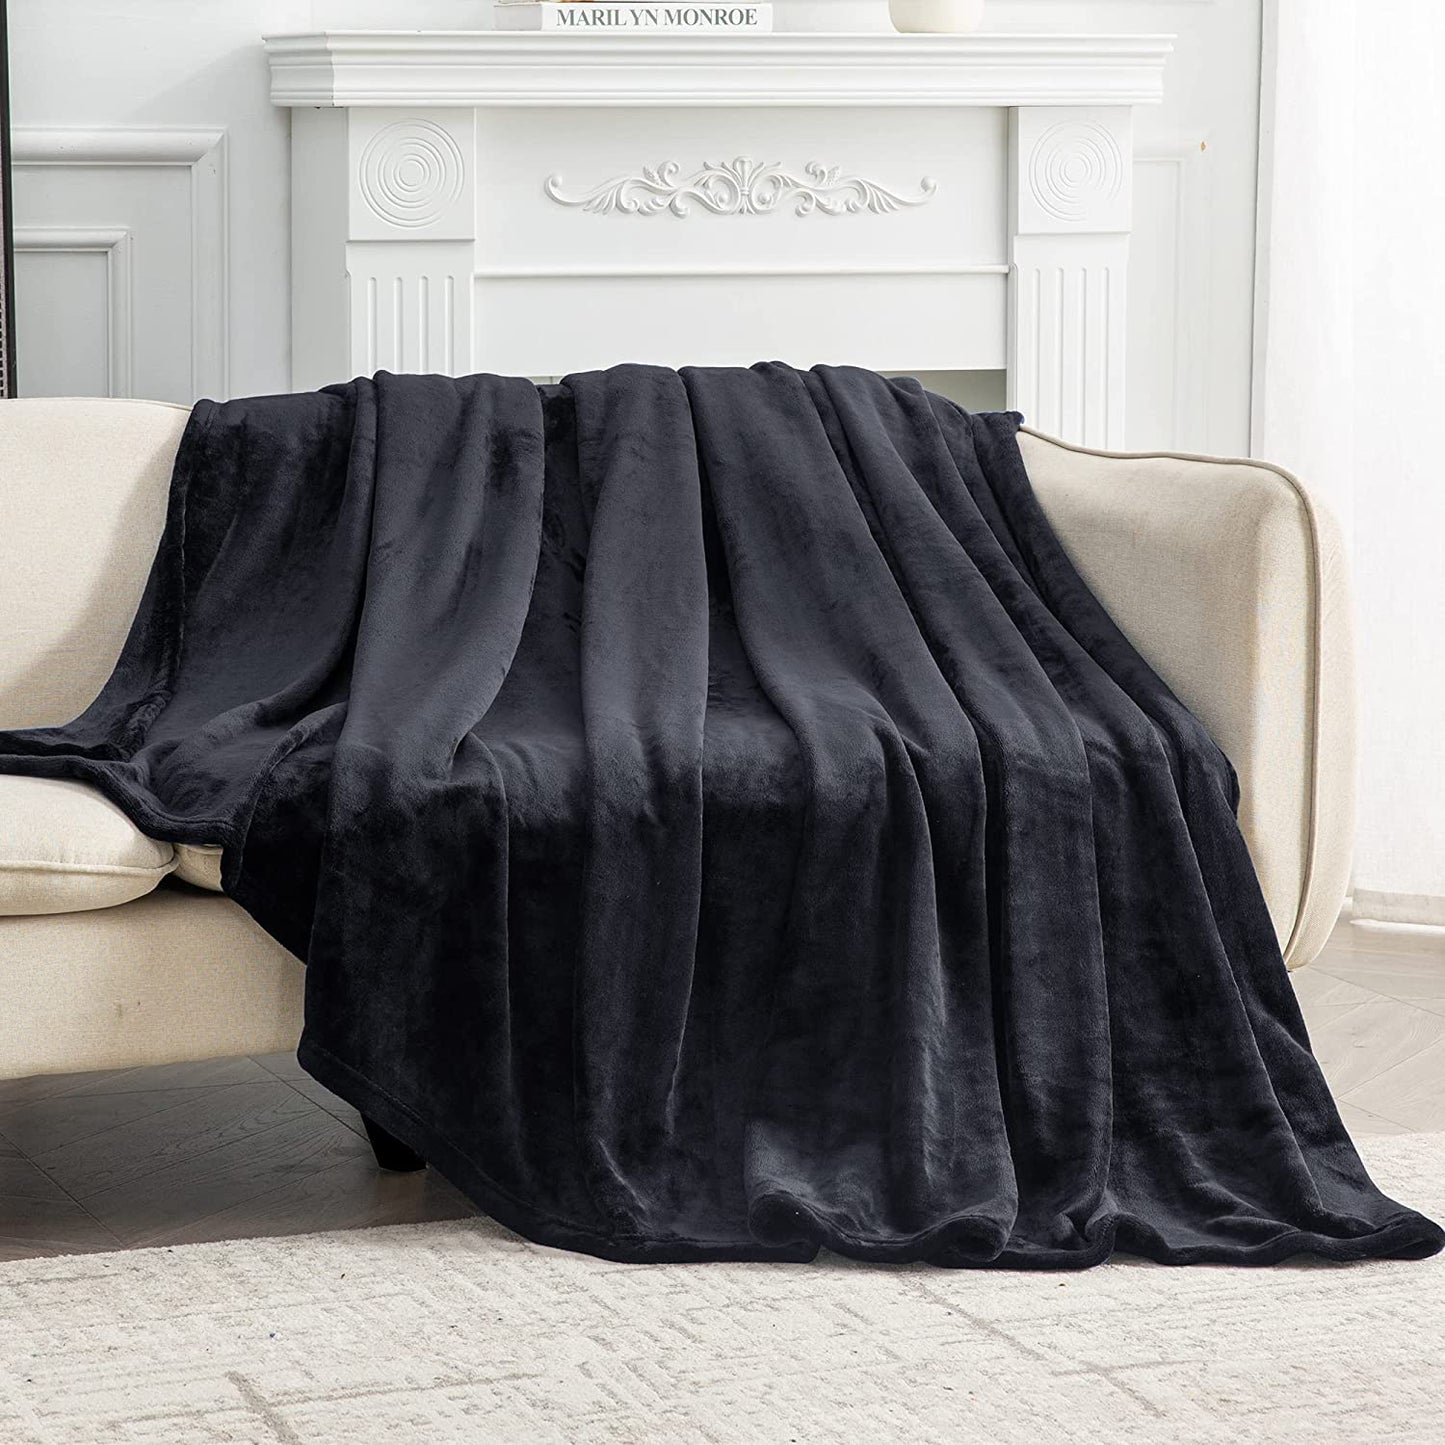 Softan 350 GSM Throw Lightweight Fleece Blanket for Bed, Sofa, Couch Suitable for All Season